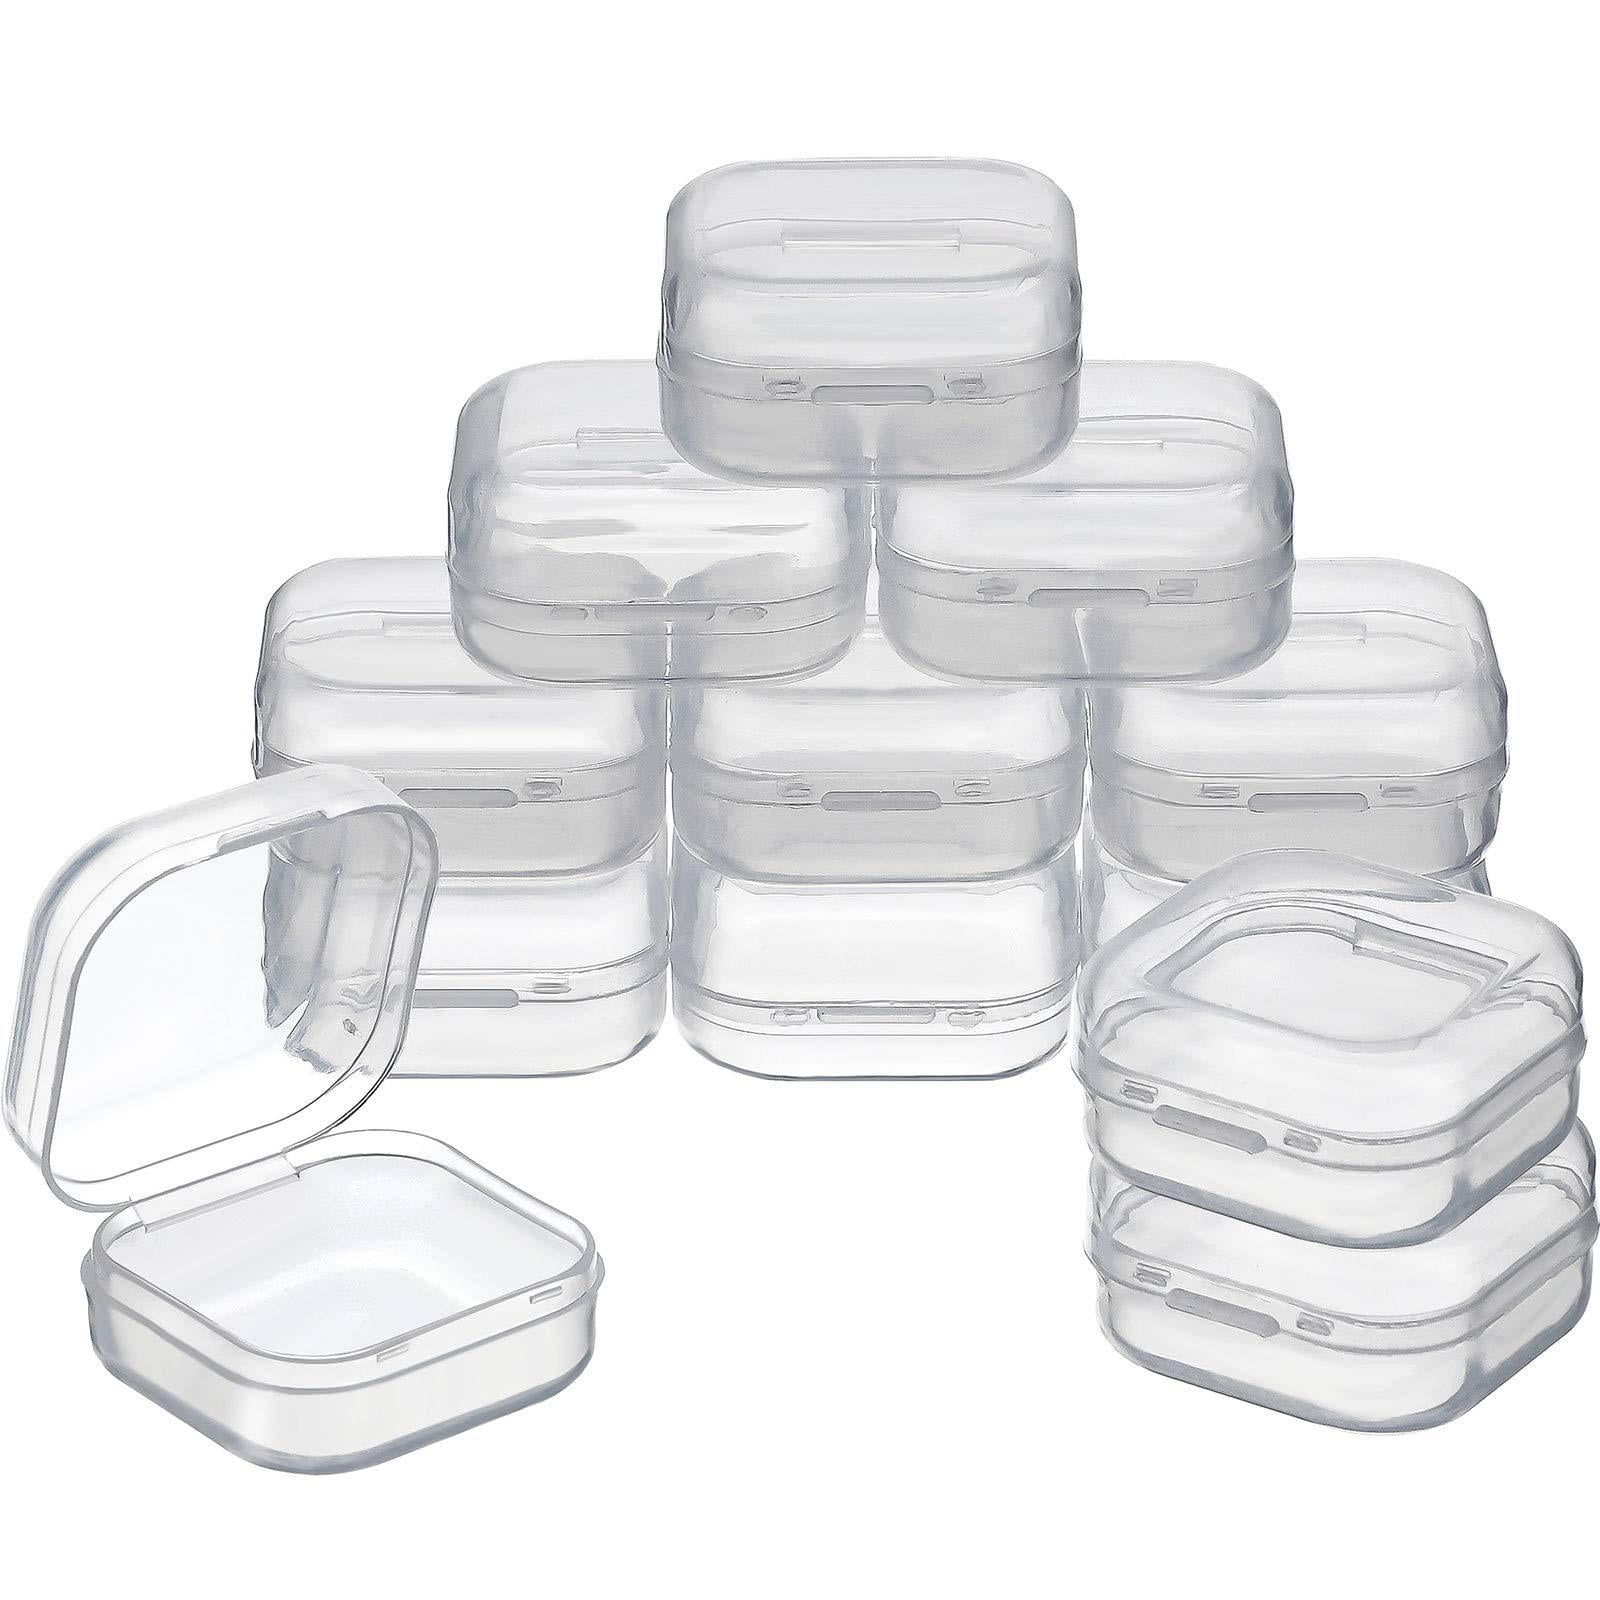 1.37 x 1.37 x 0.7 Inch SATINIOR 12 Pack Clear Plastic Beads Storage Containers Box with Hinged Lid for Beads and More 